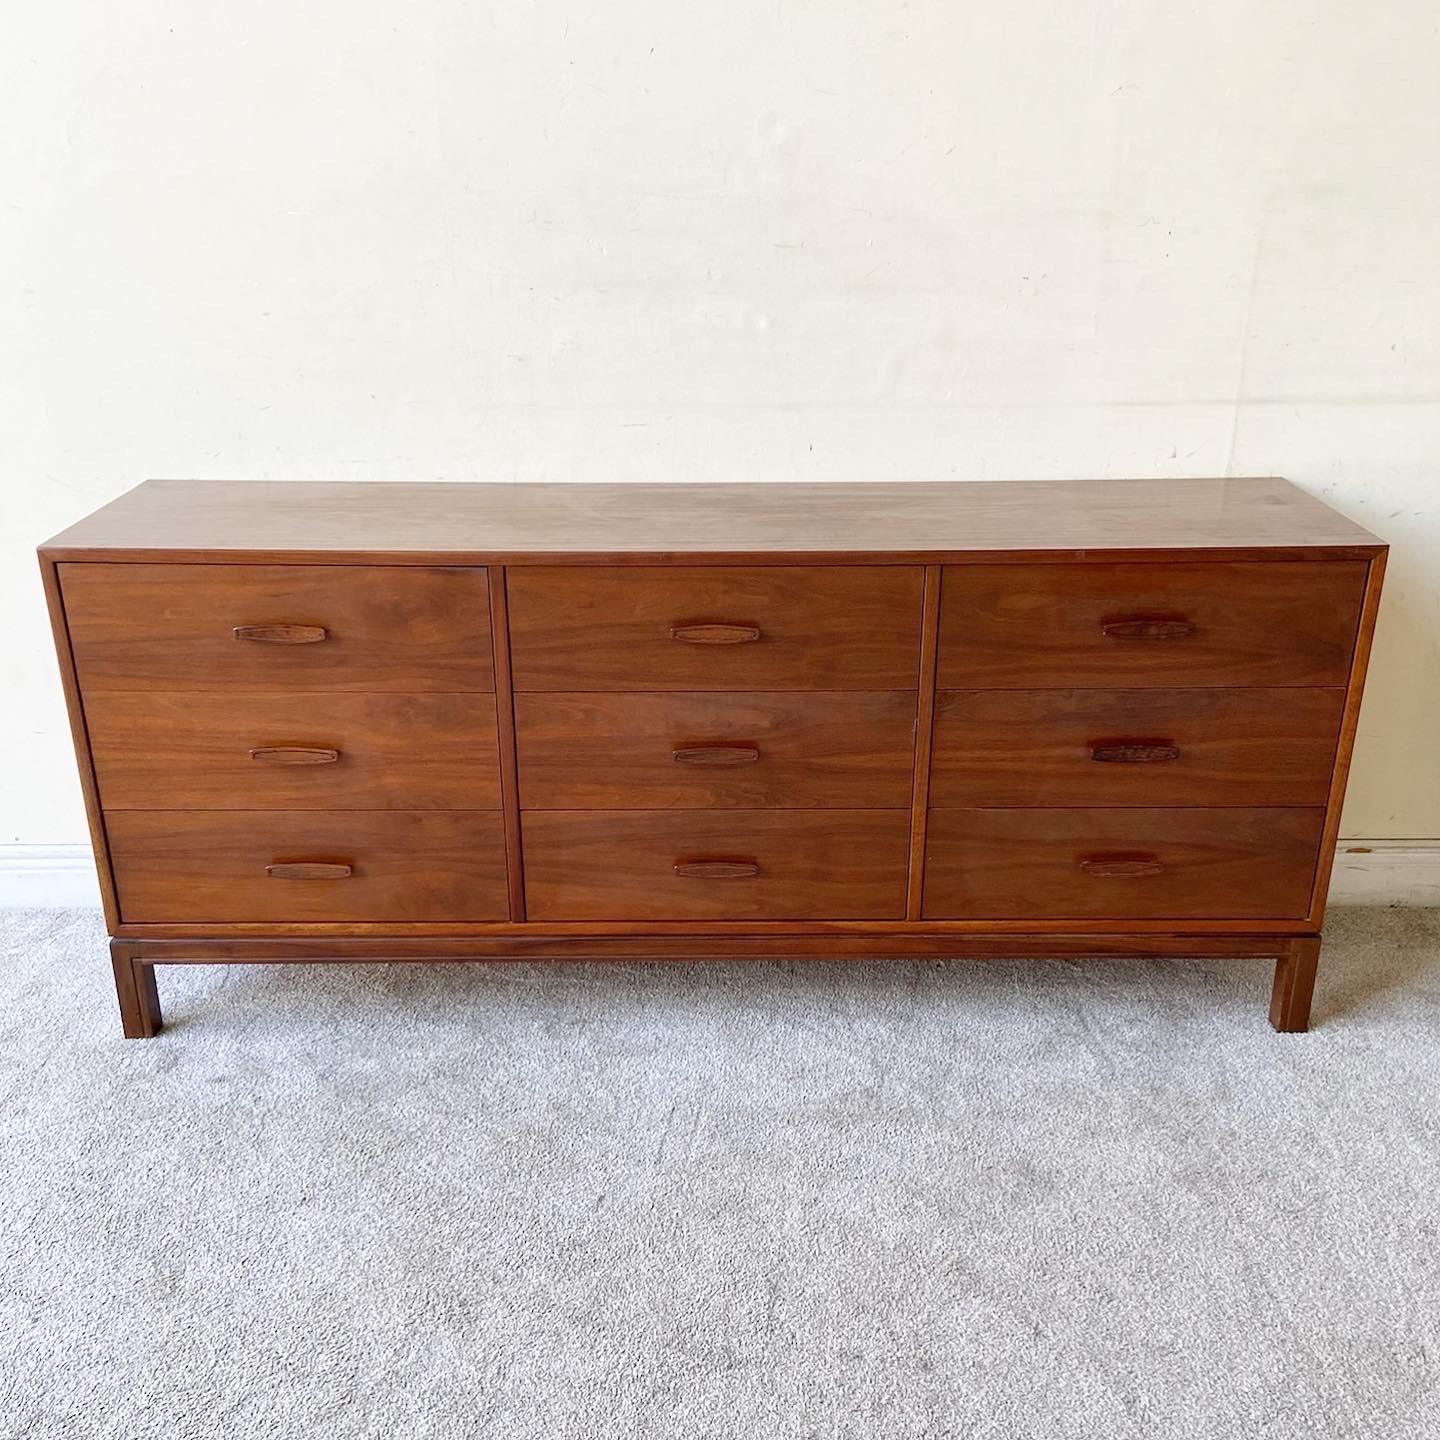 Phenomenal mid century modern wooden triple dresser. Features nine spacious drawer with carved drawer pulls.